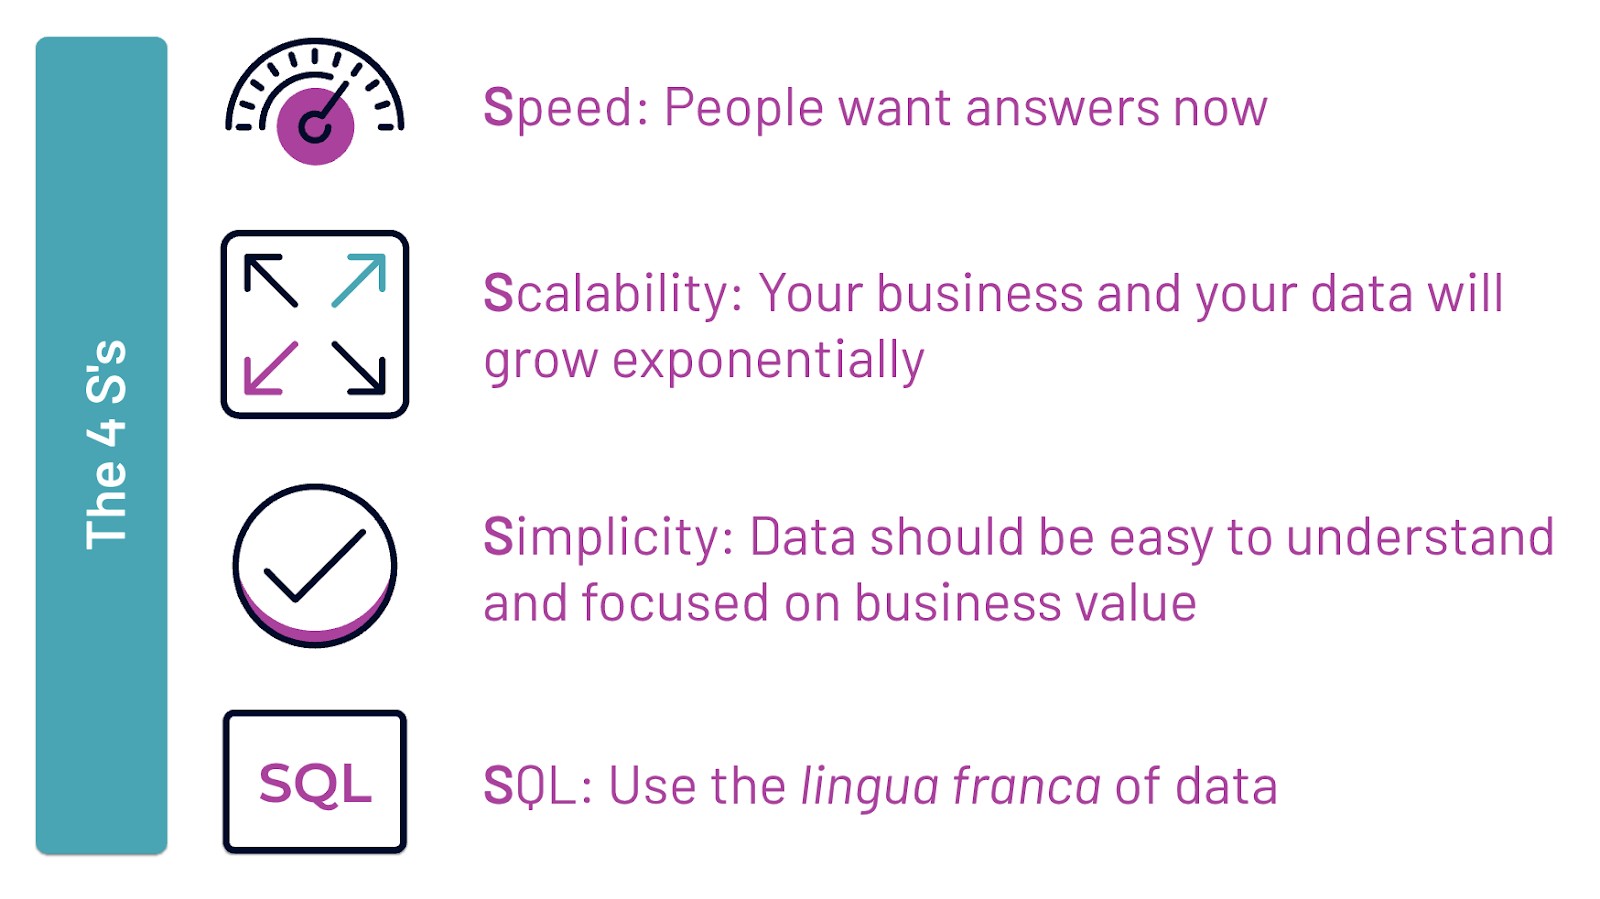 Speed, Scalability, Simplicity, and SQL